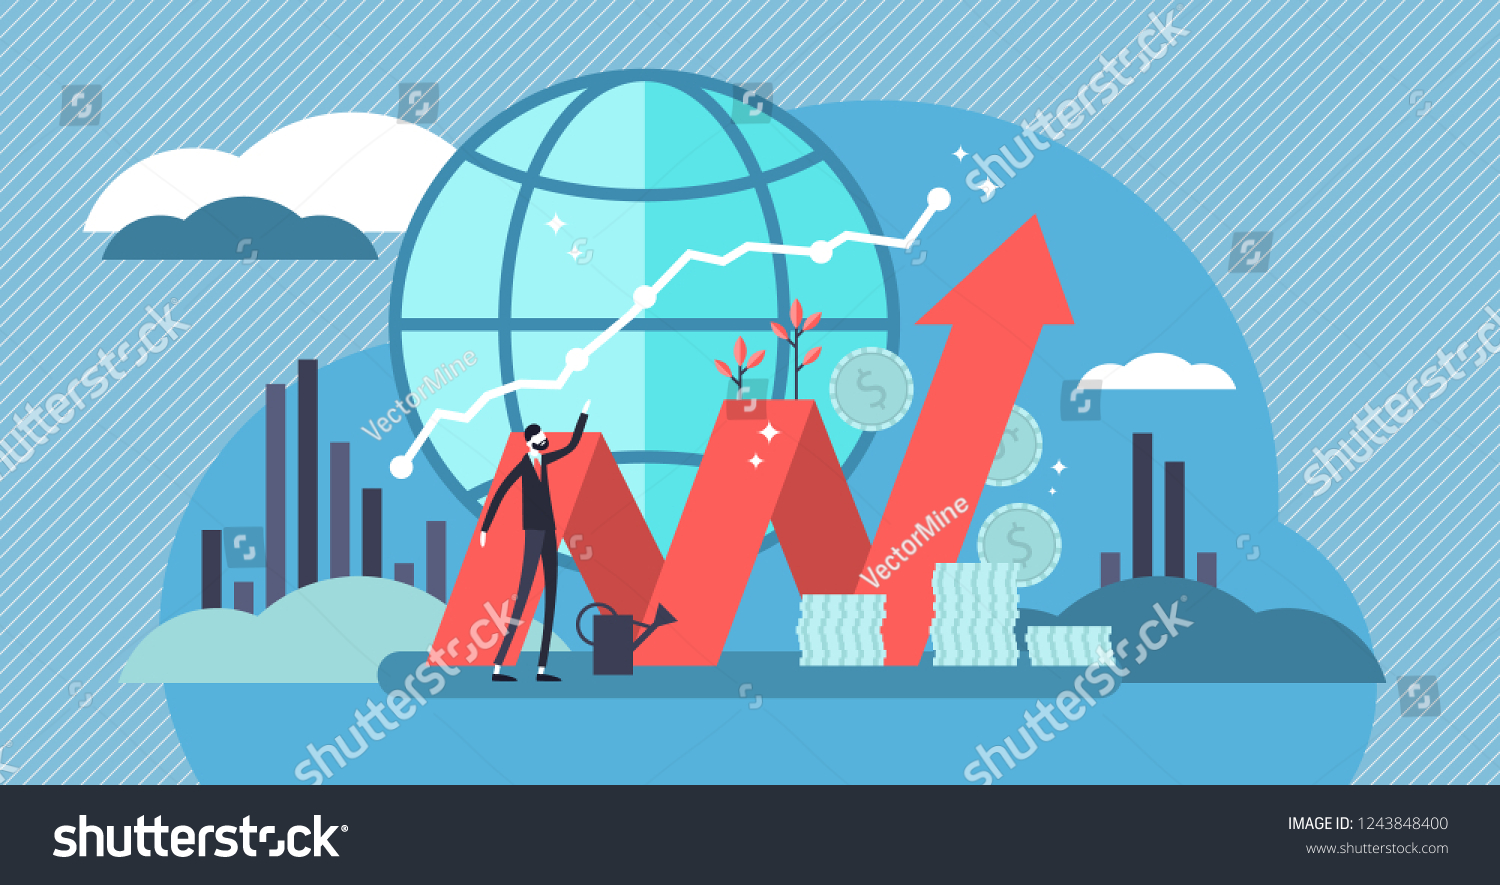 Stock market vector illustration. Flat mini money growth persons concept with positive and successful indicators. Global investment business value improvement. Finance and economy profit with coins. #1243848400